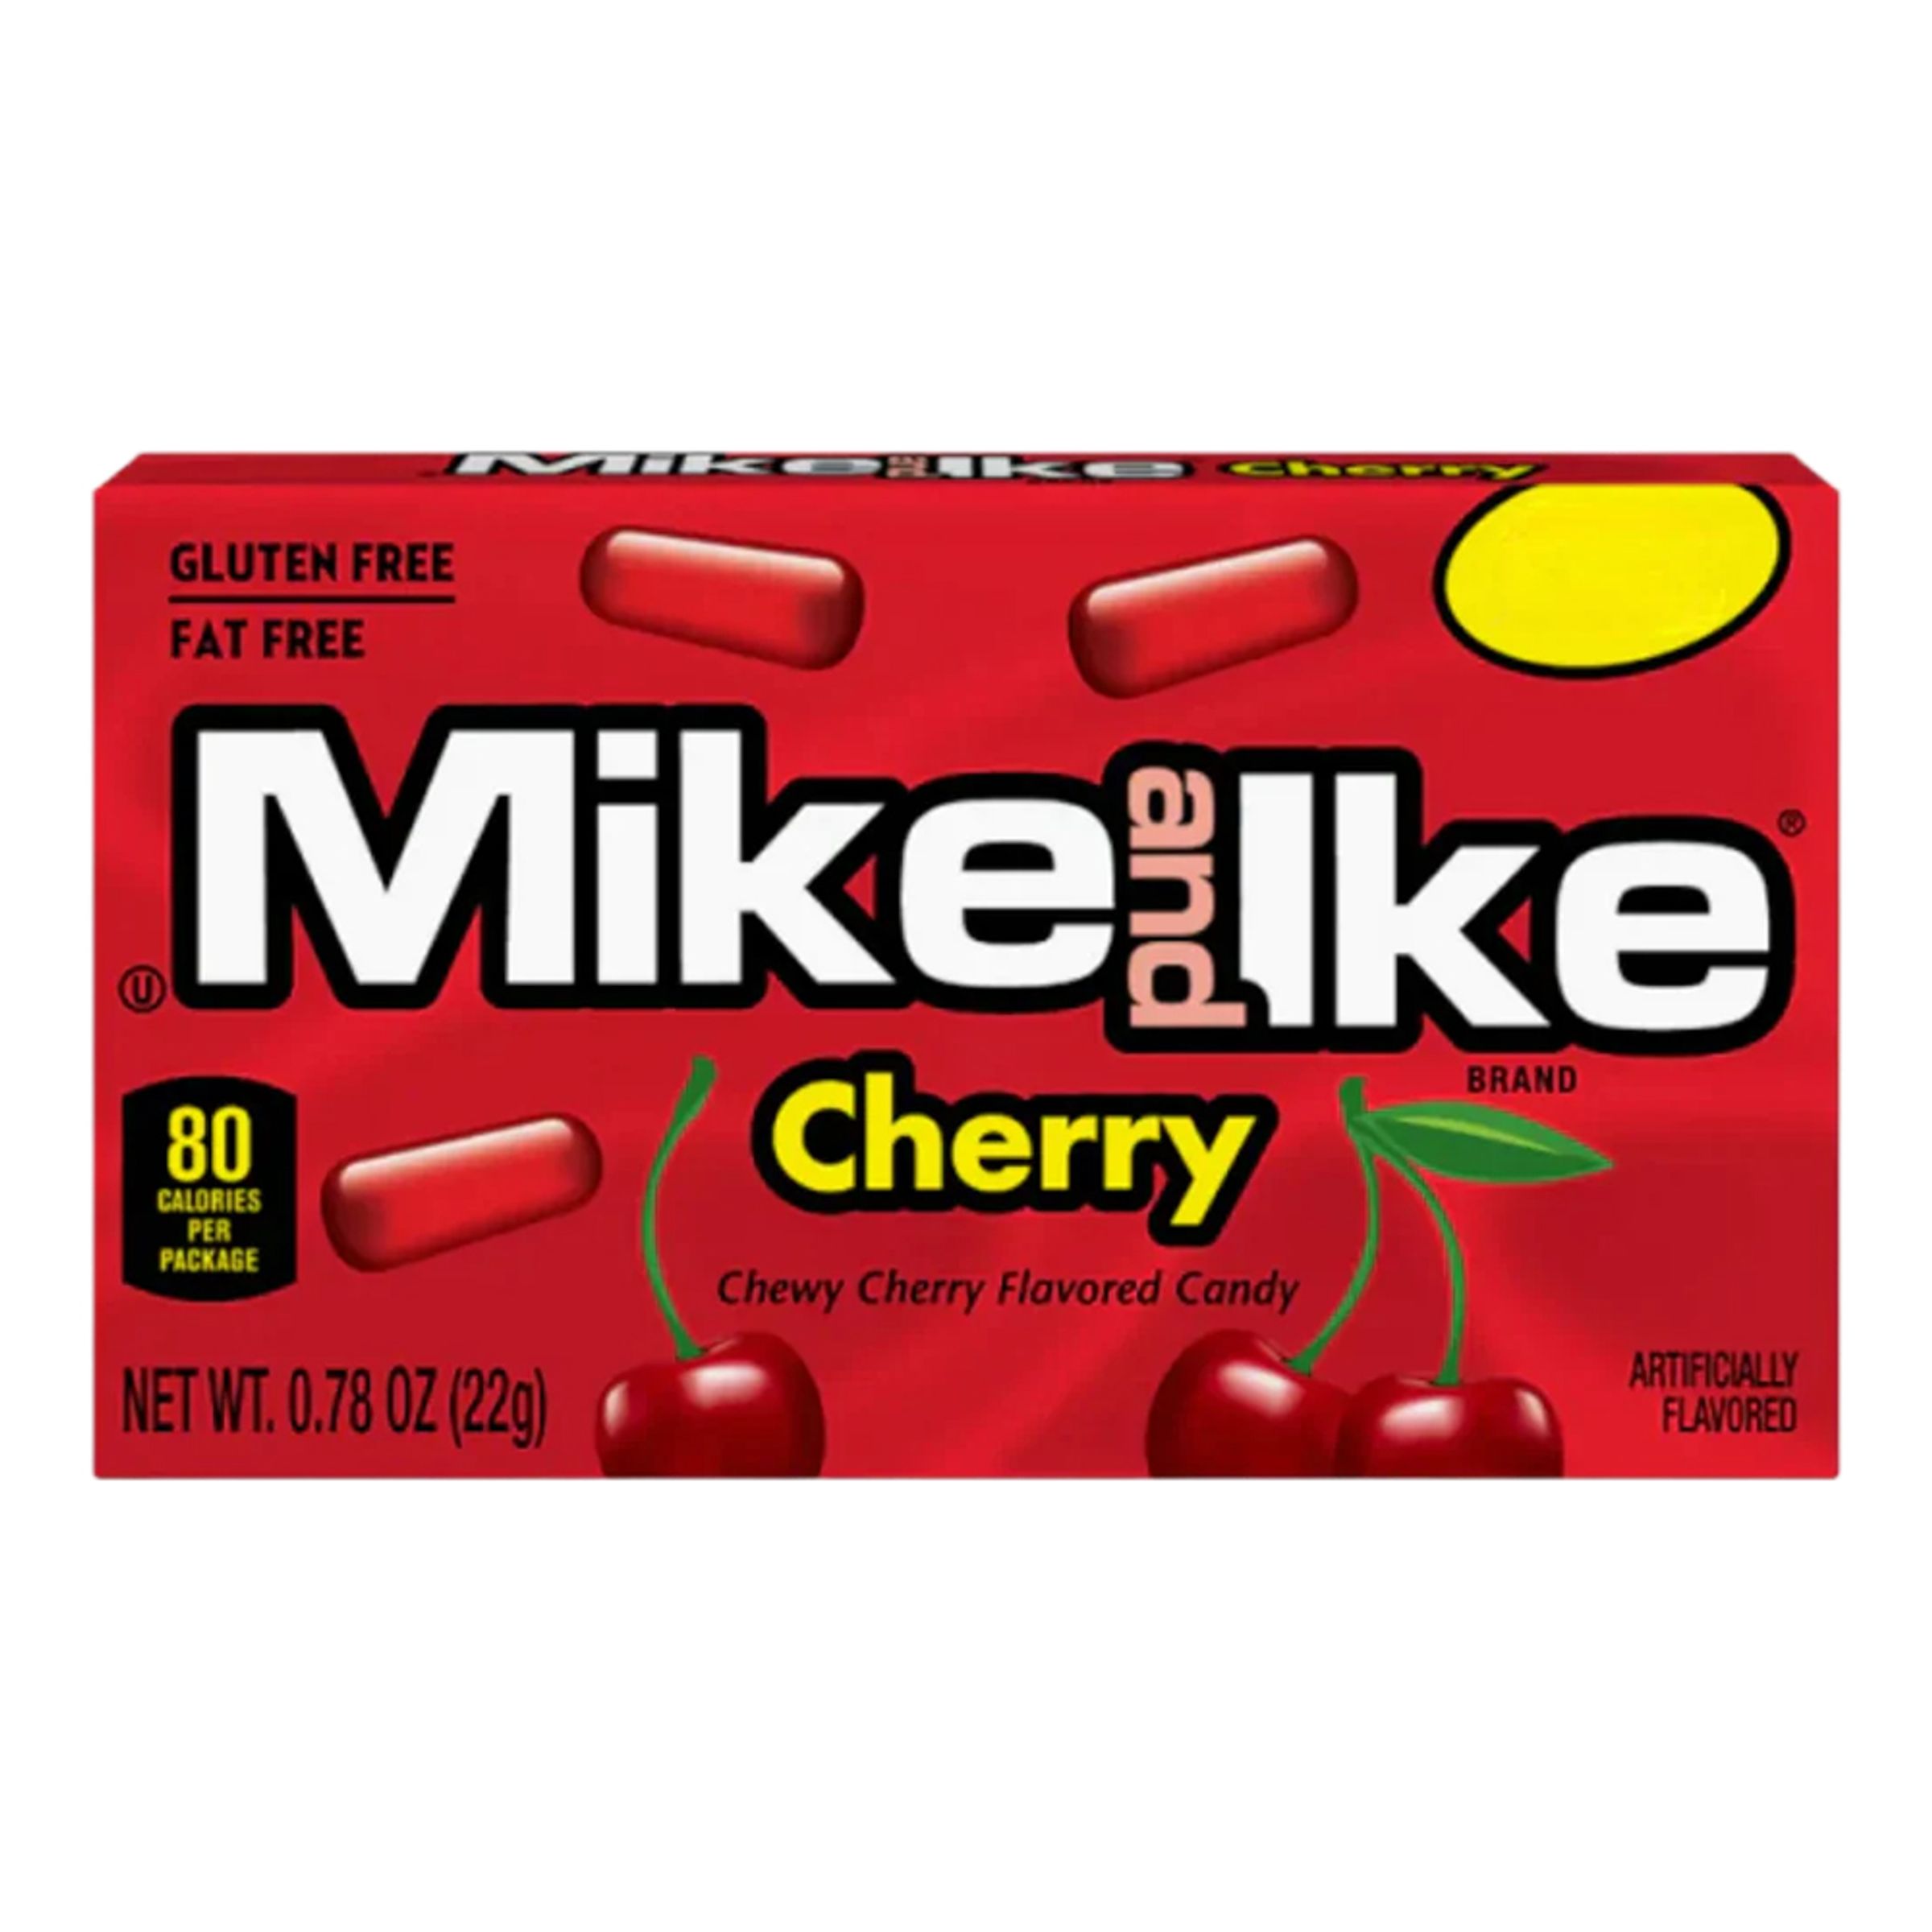 Mike and Ike Cherry Storpack - 24-pack